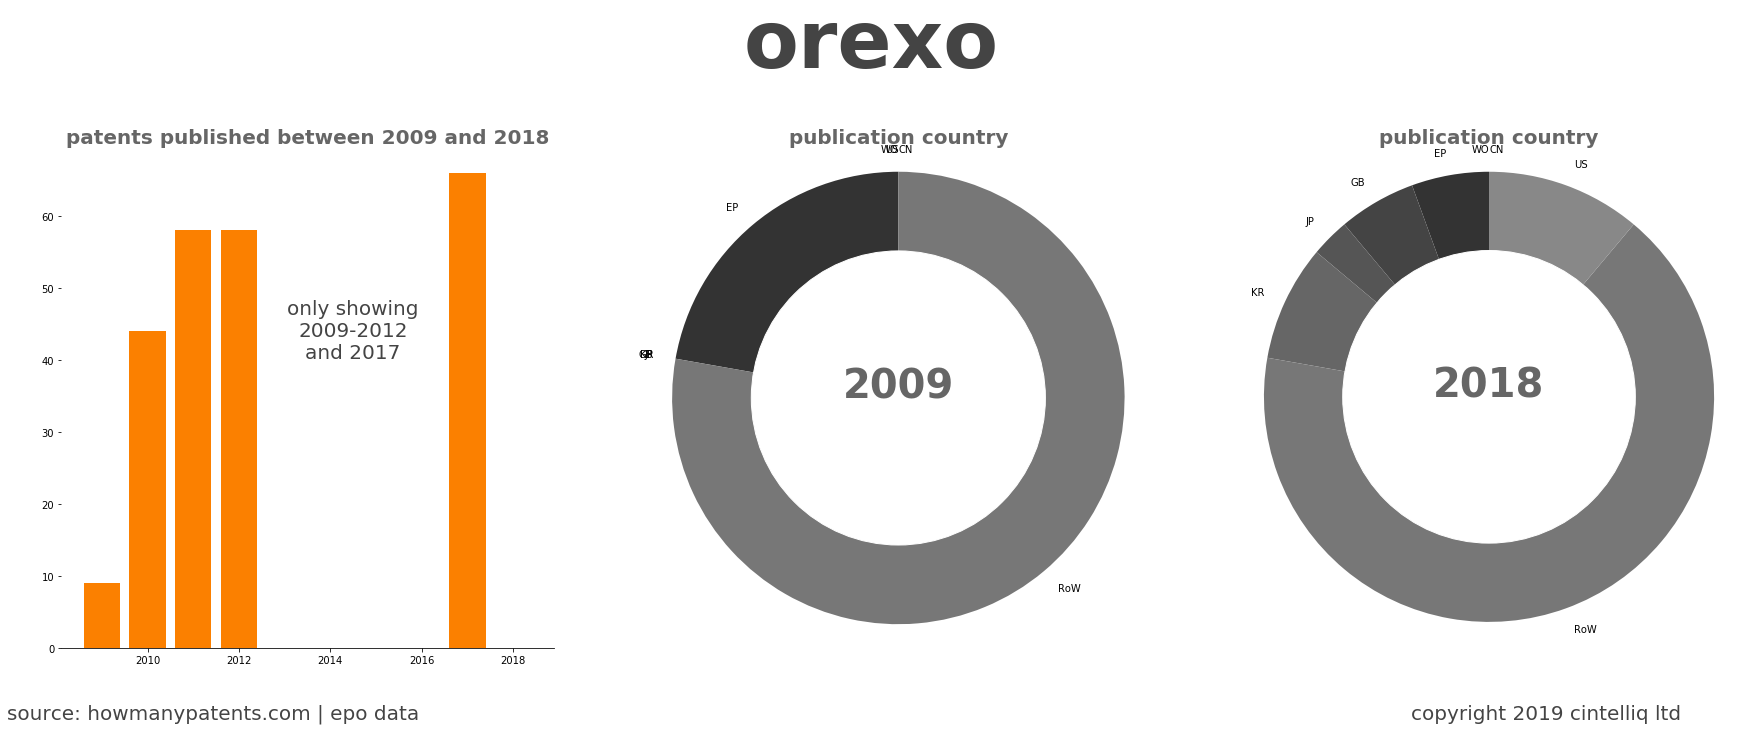 summary of patents for Orexo